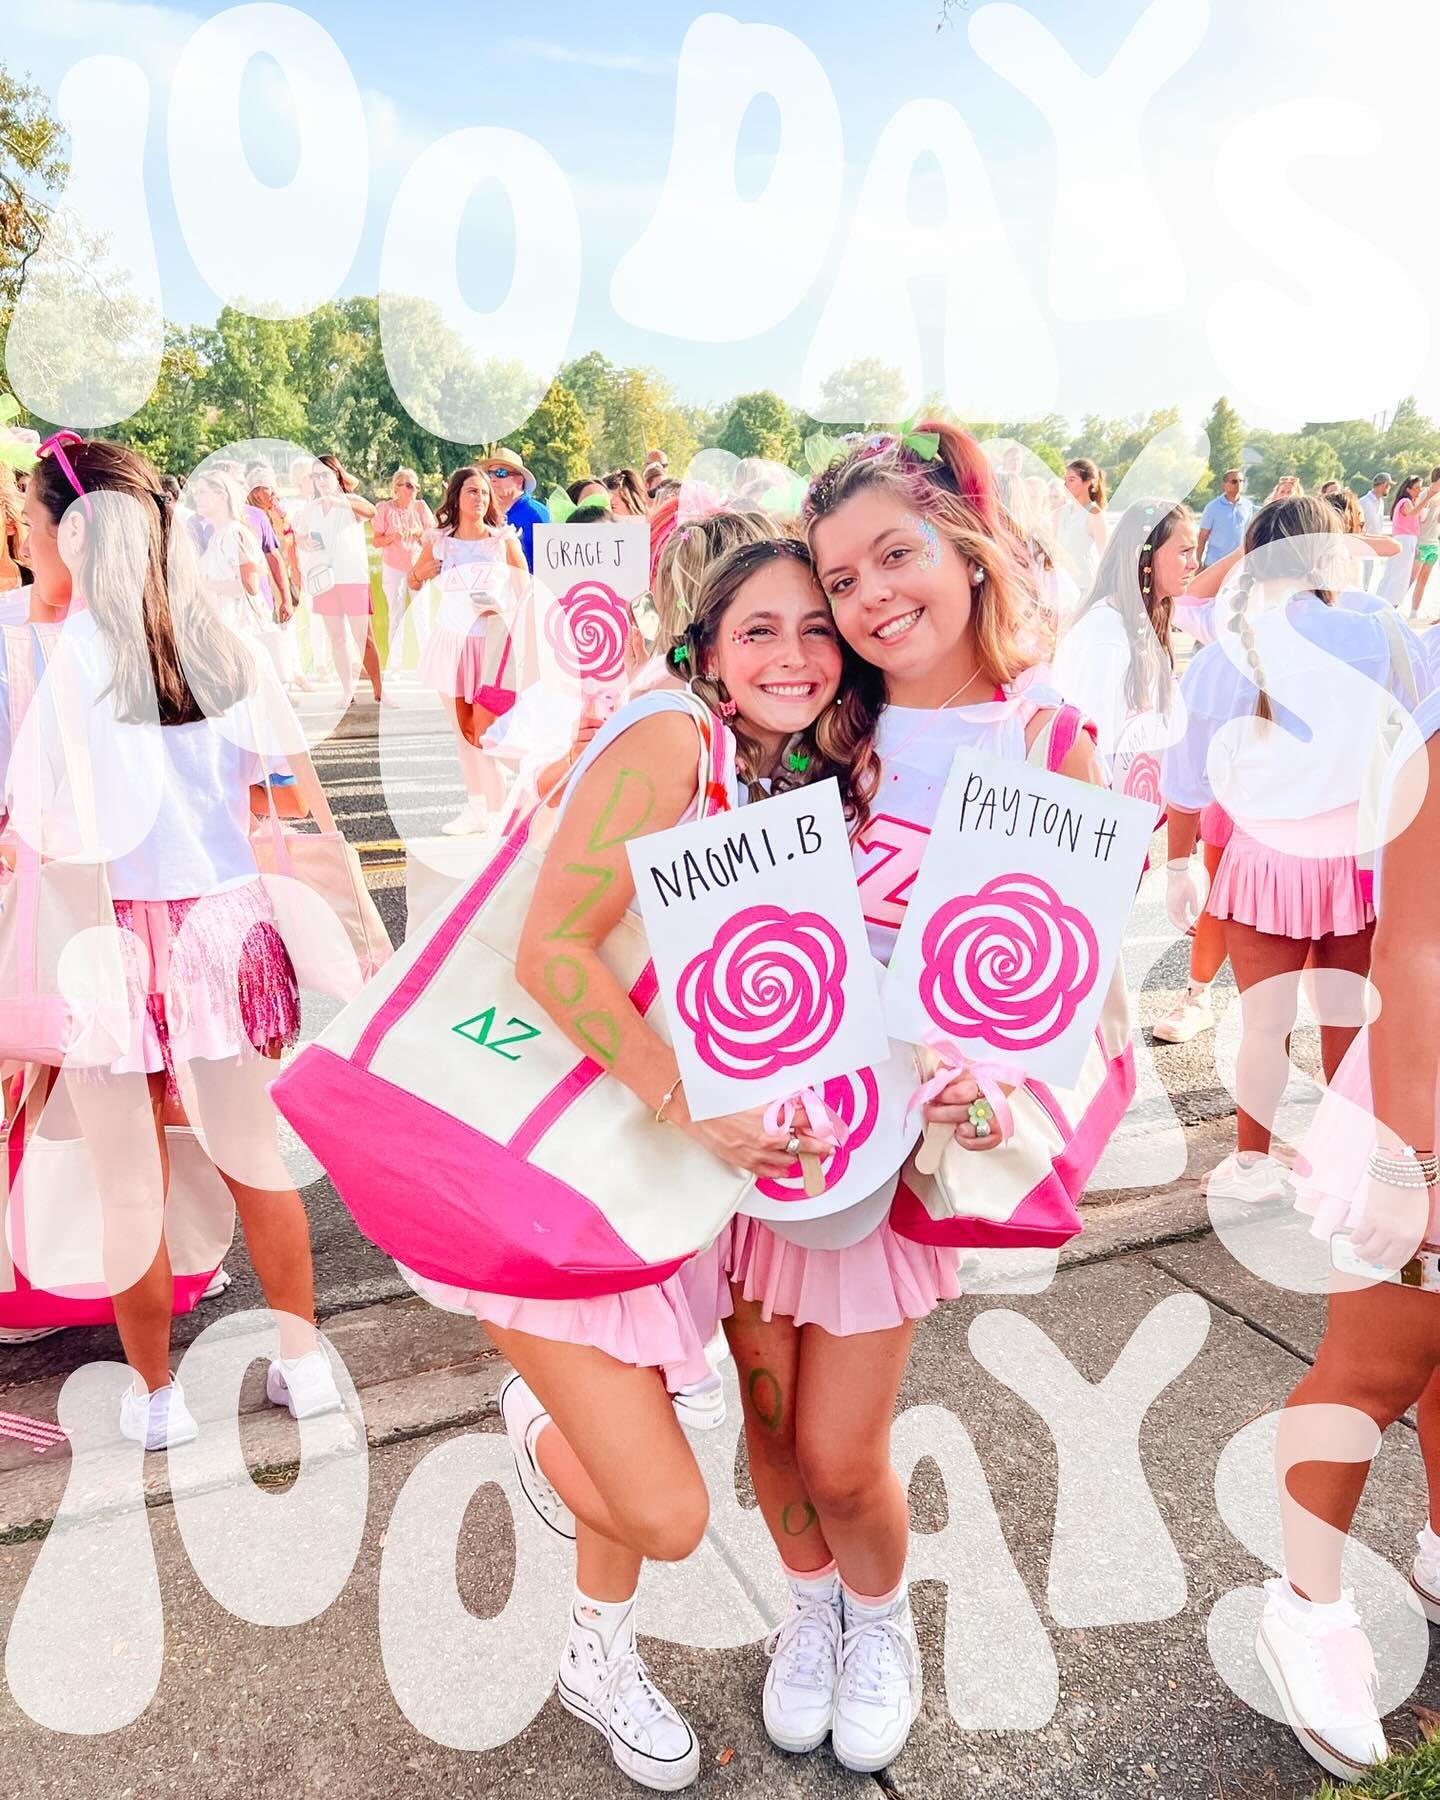 OFFICIALLY 100 DAYS UNTIL BID DAY, but who&rsquo;s counting?!🤭 We are so excited to meet you PC&rsquo;24!!!🩷💚

If you haven&rsquo;t registered for recruitment yet, click the link in our bio!
#LSUDZ